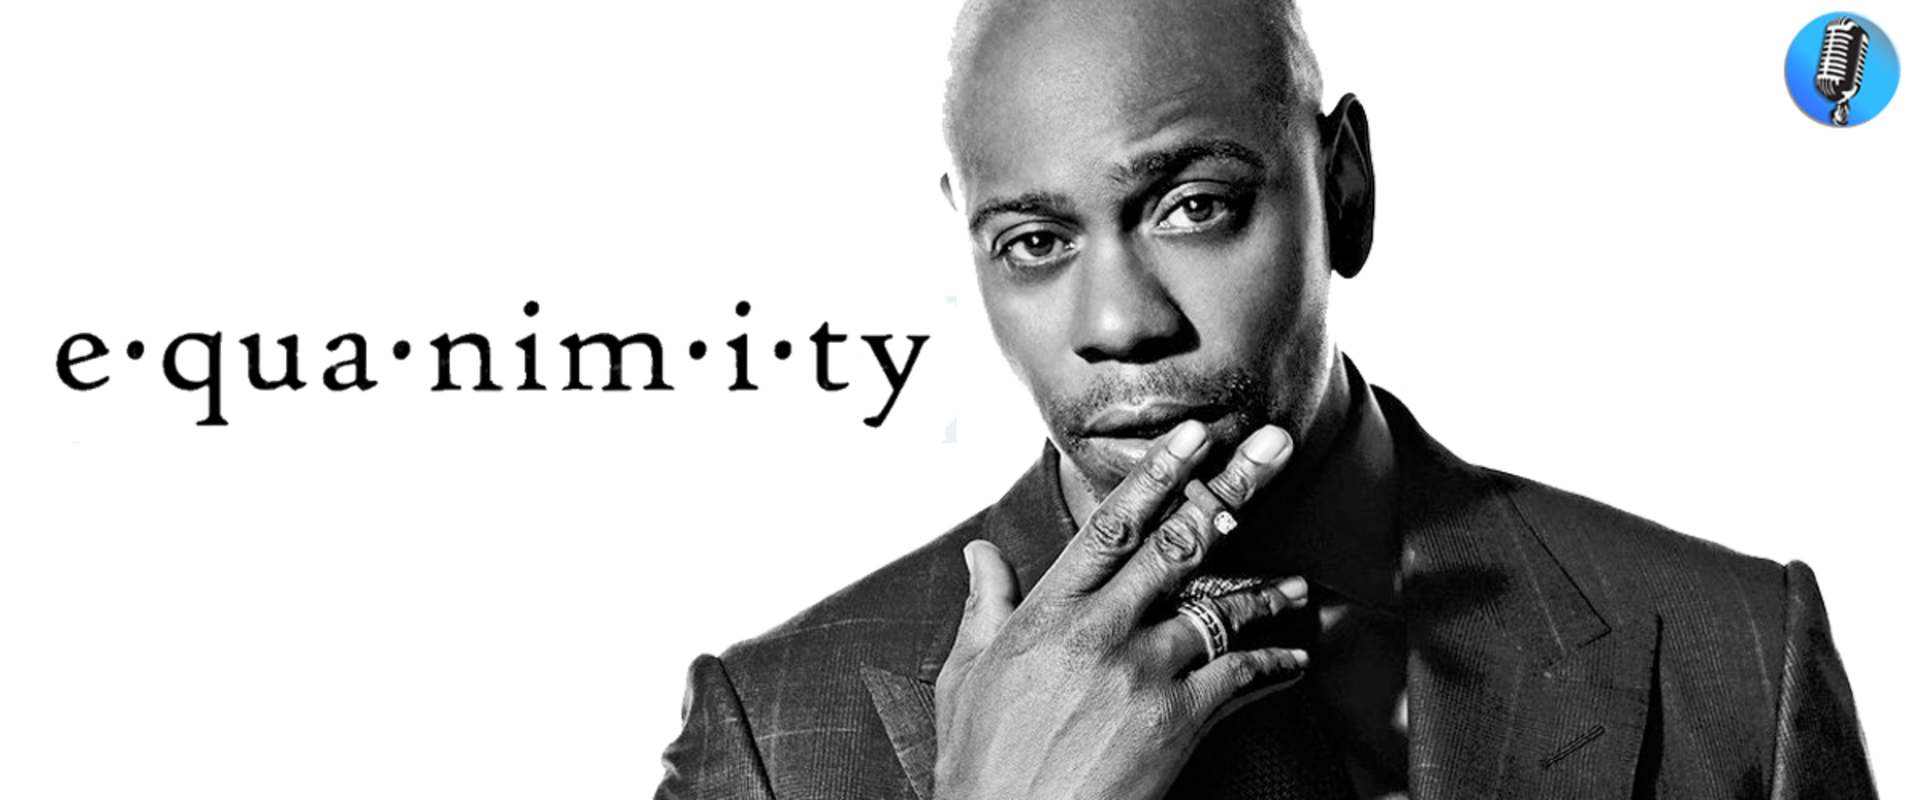 Dave Chappelle: Equanimity background 2